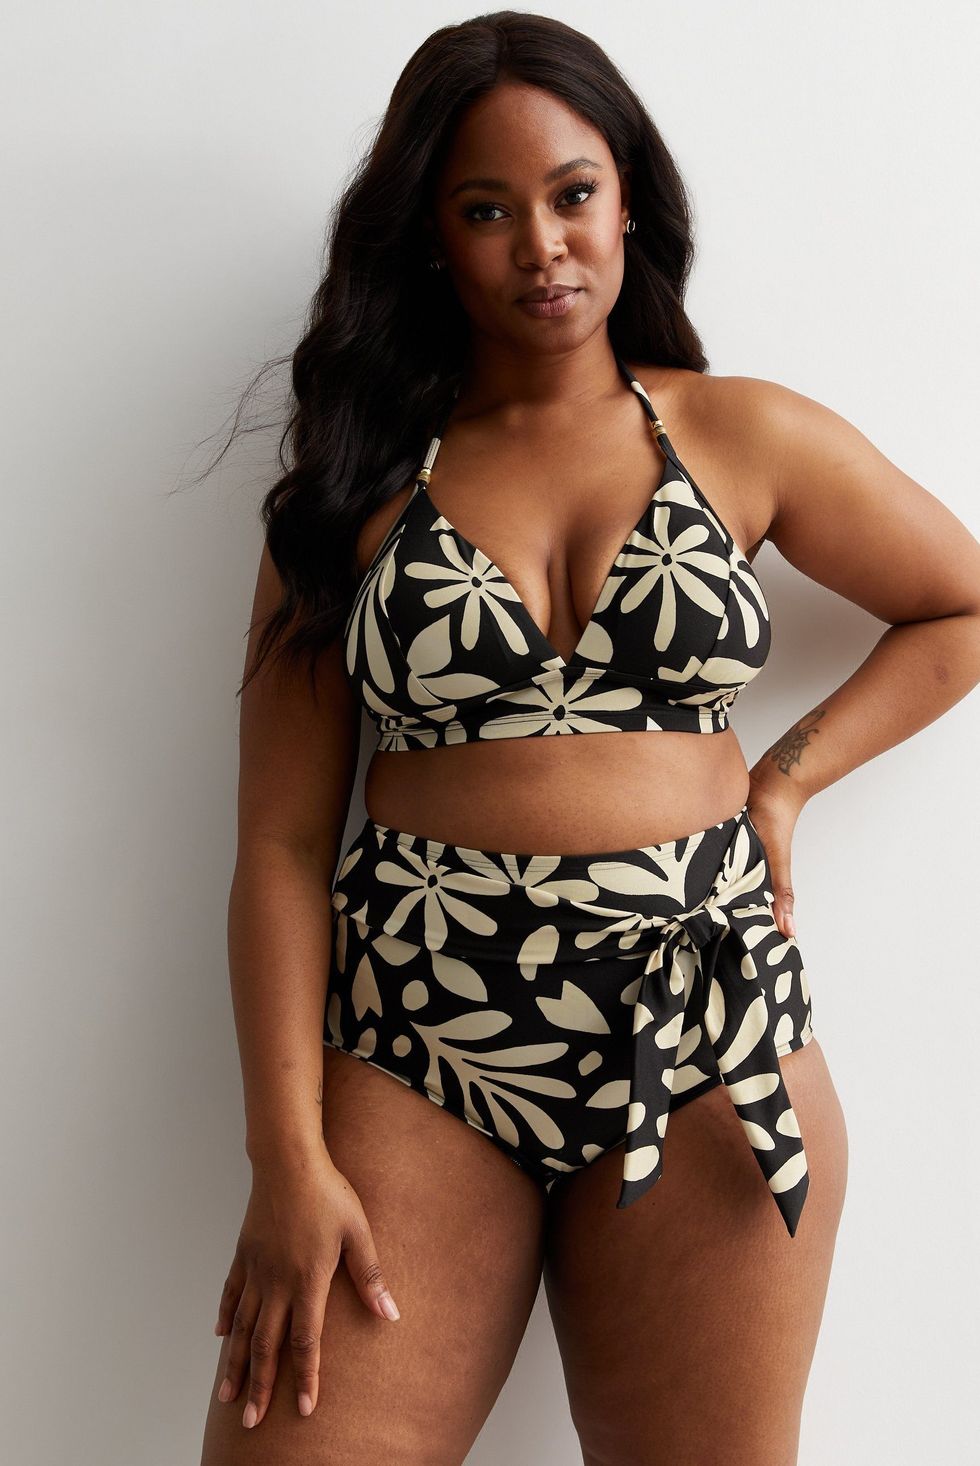 Boden Swimwear: A Complete Guide to Sizing and fit - Lipgloss and